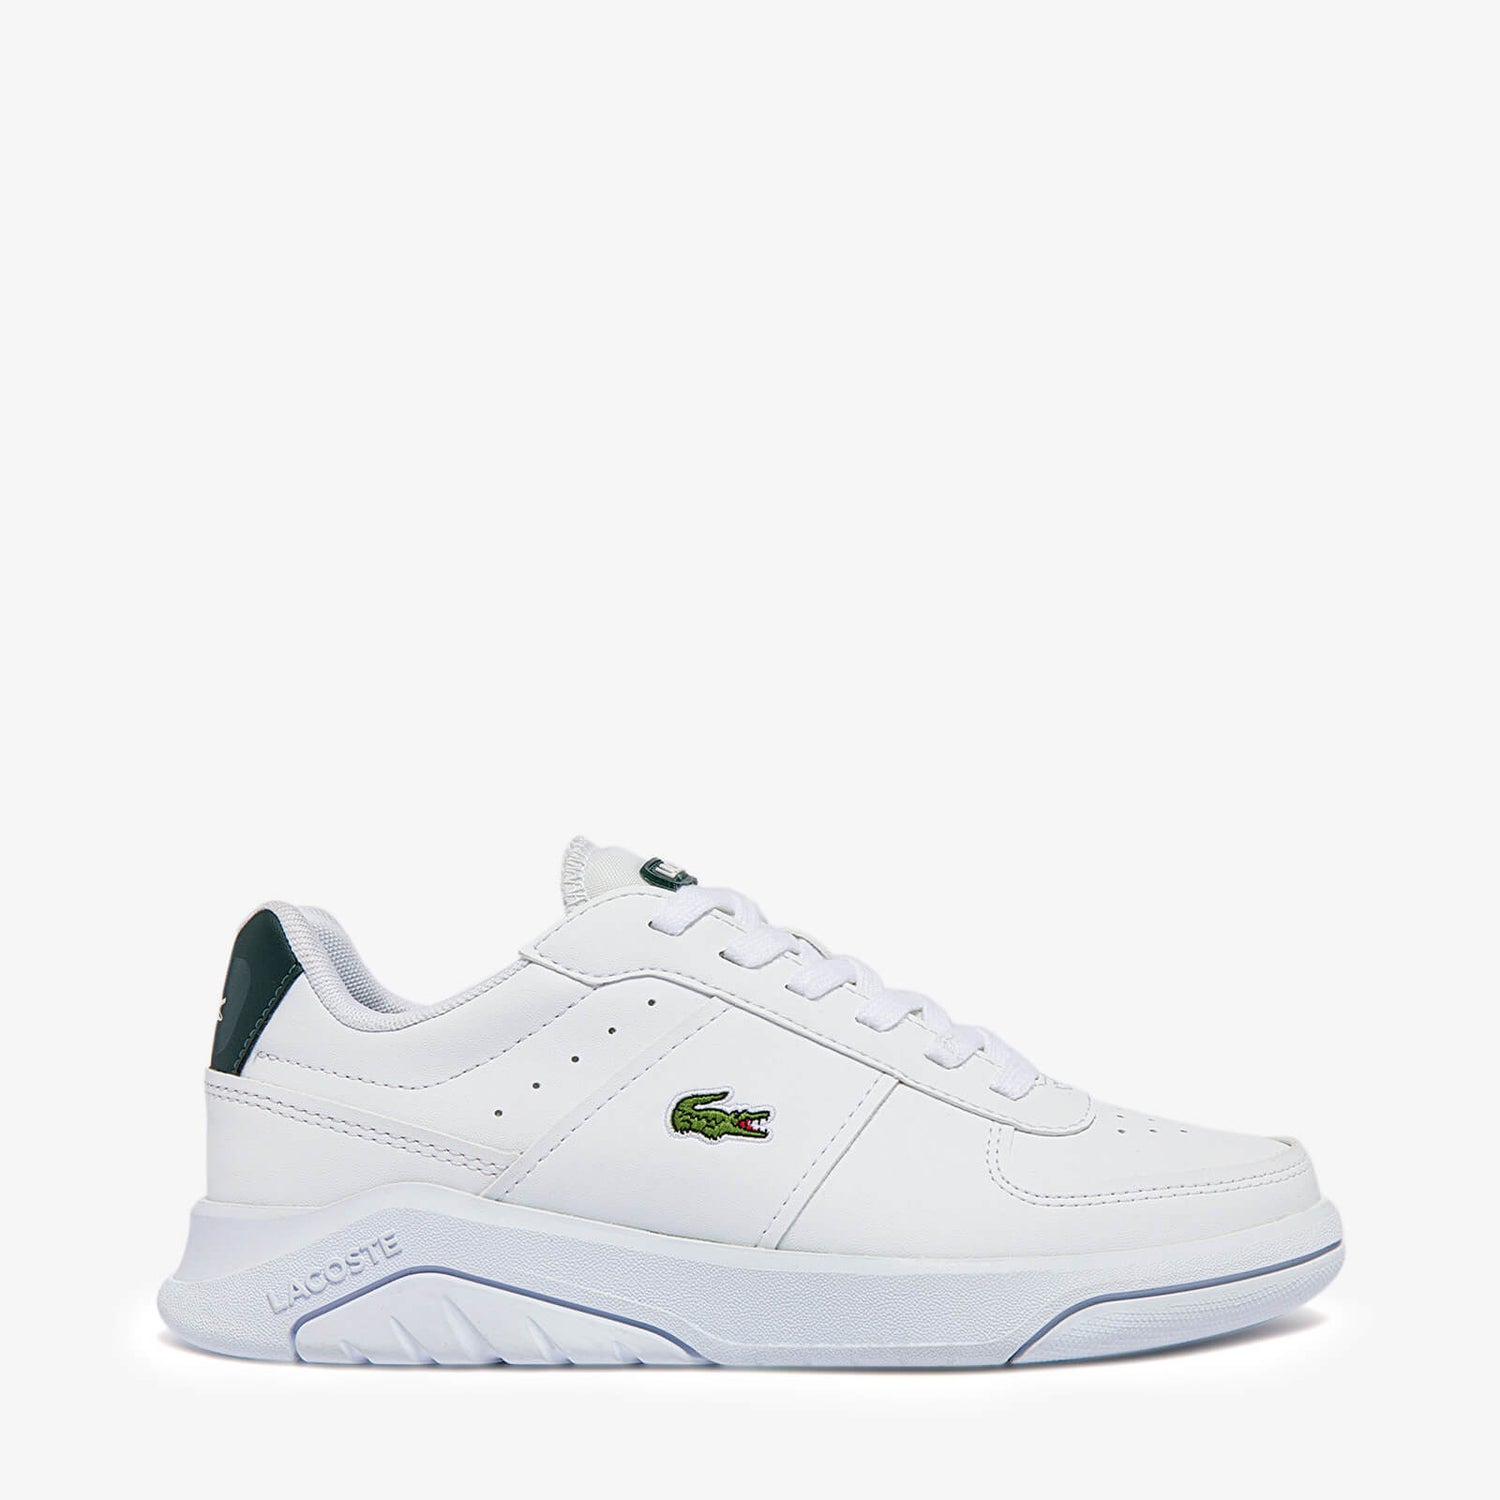 Lacoste Kids' Game Advance Trainers - White - UK 11 Kids